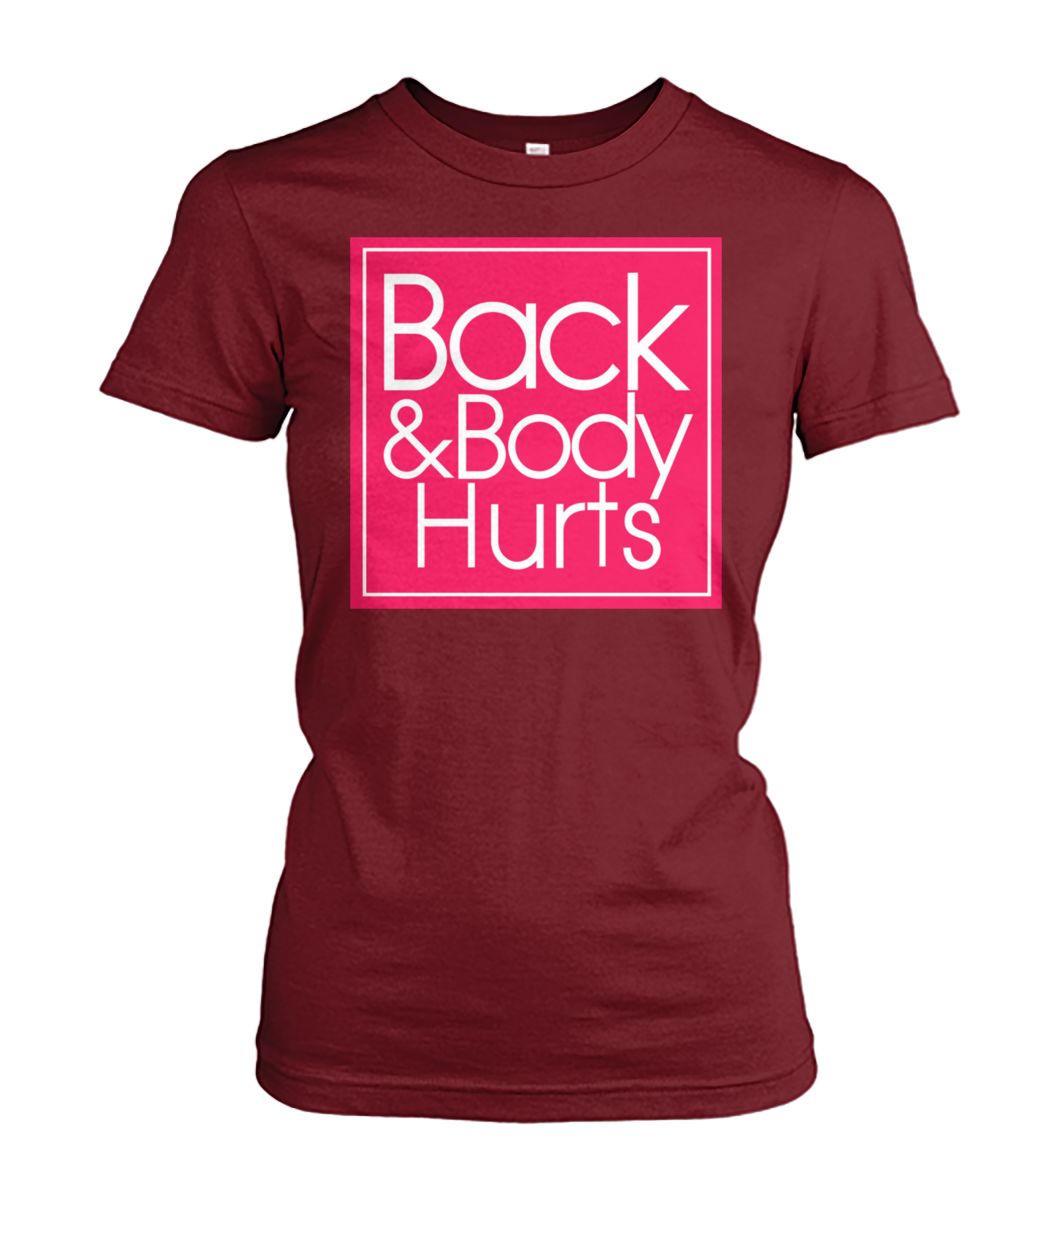 My back and body hurts women's crew tee